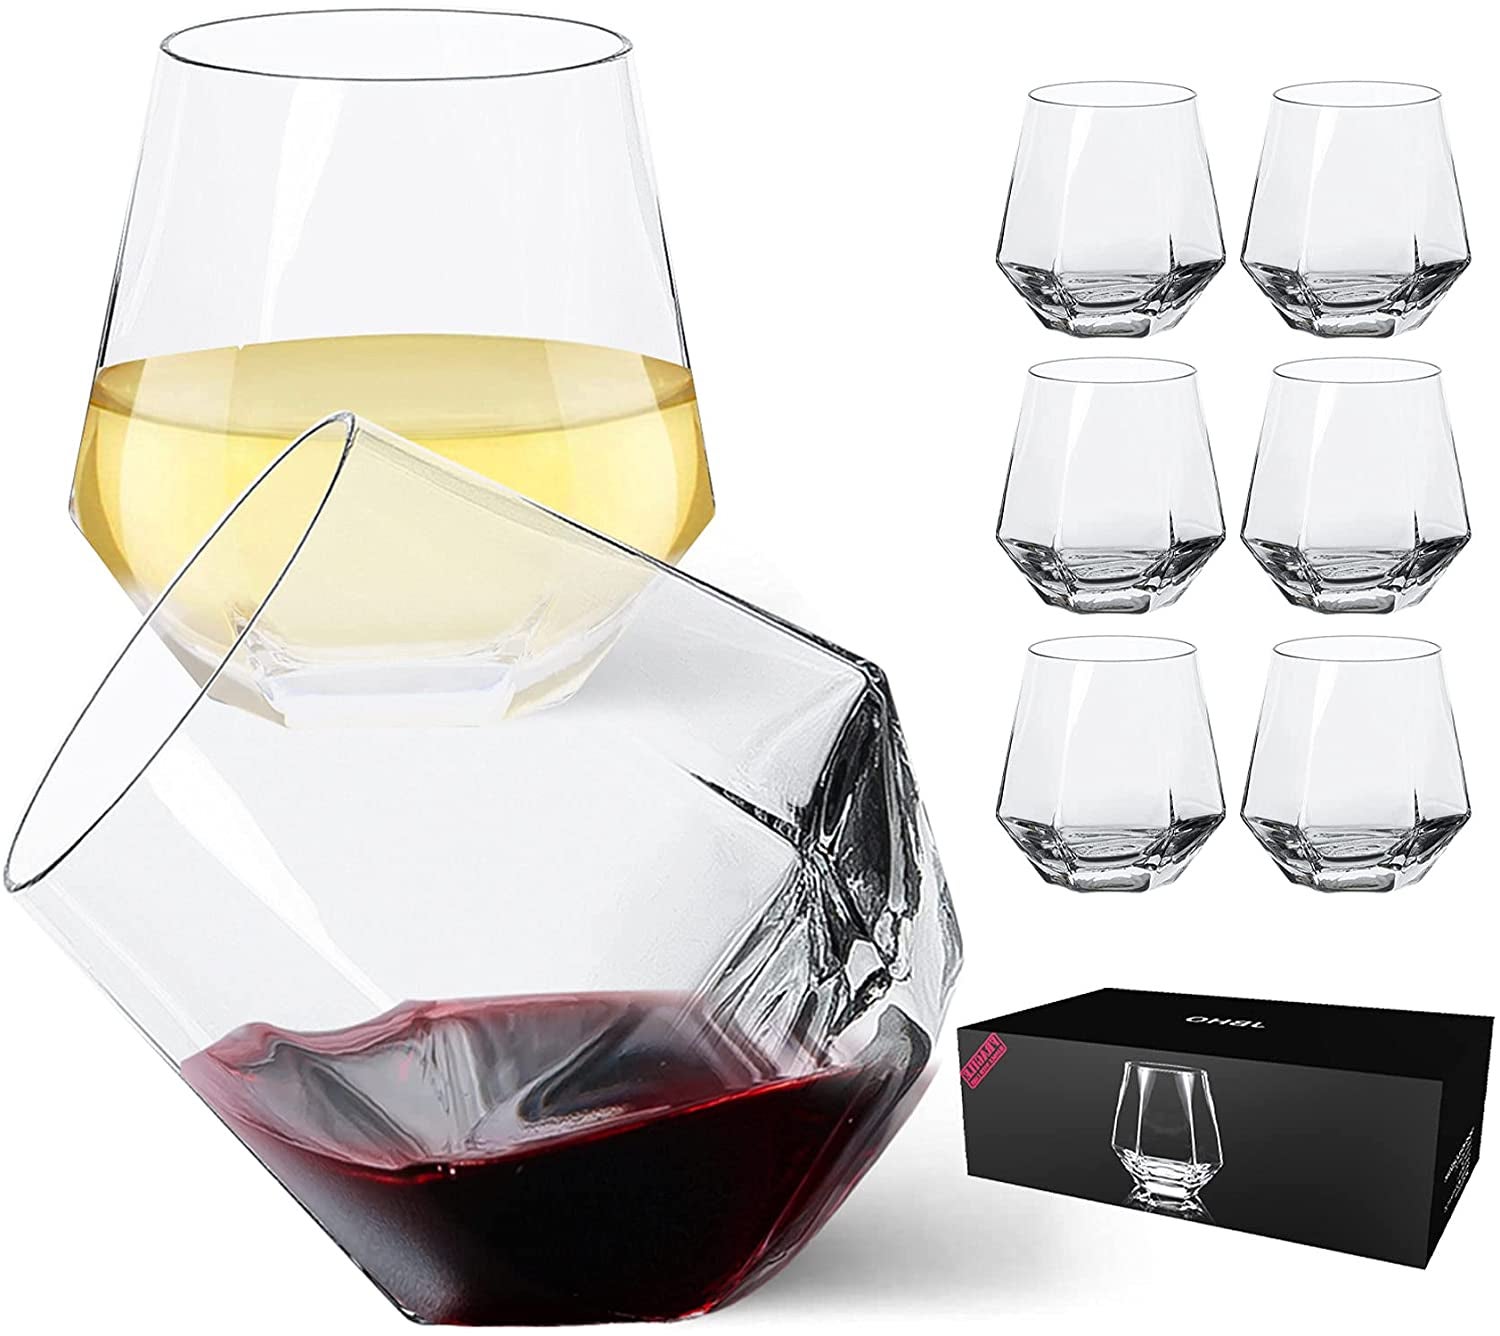 Image of eight wine glasses and their black packaging